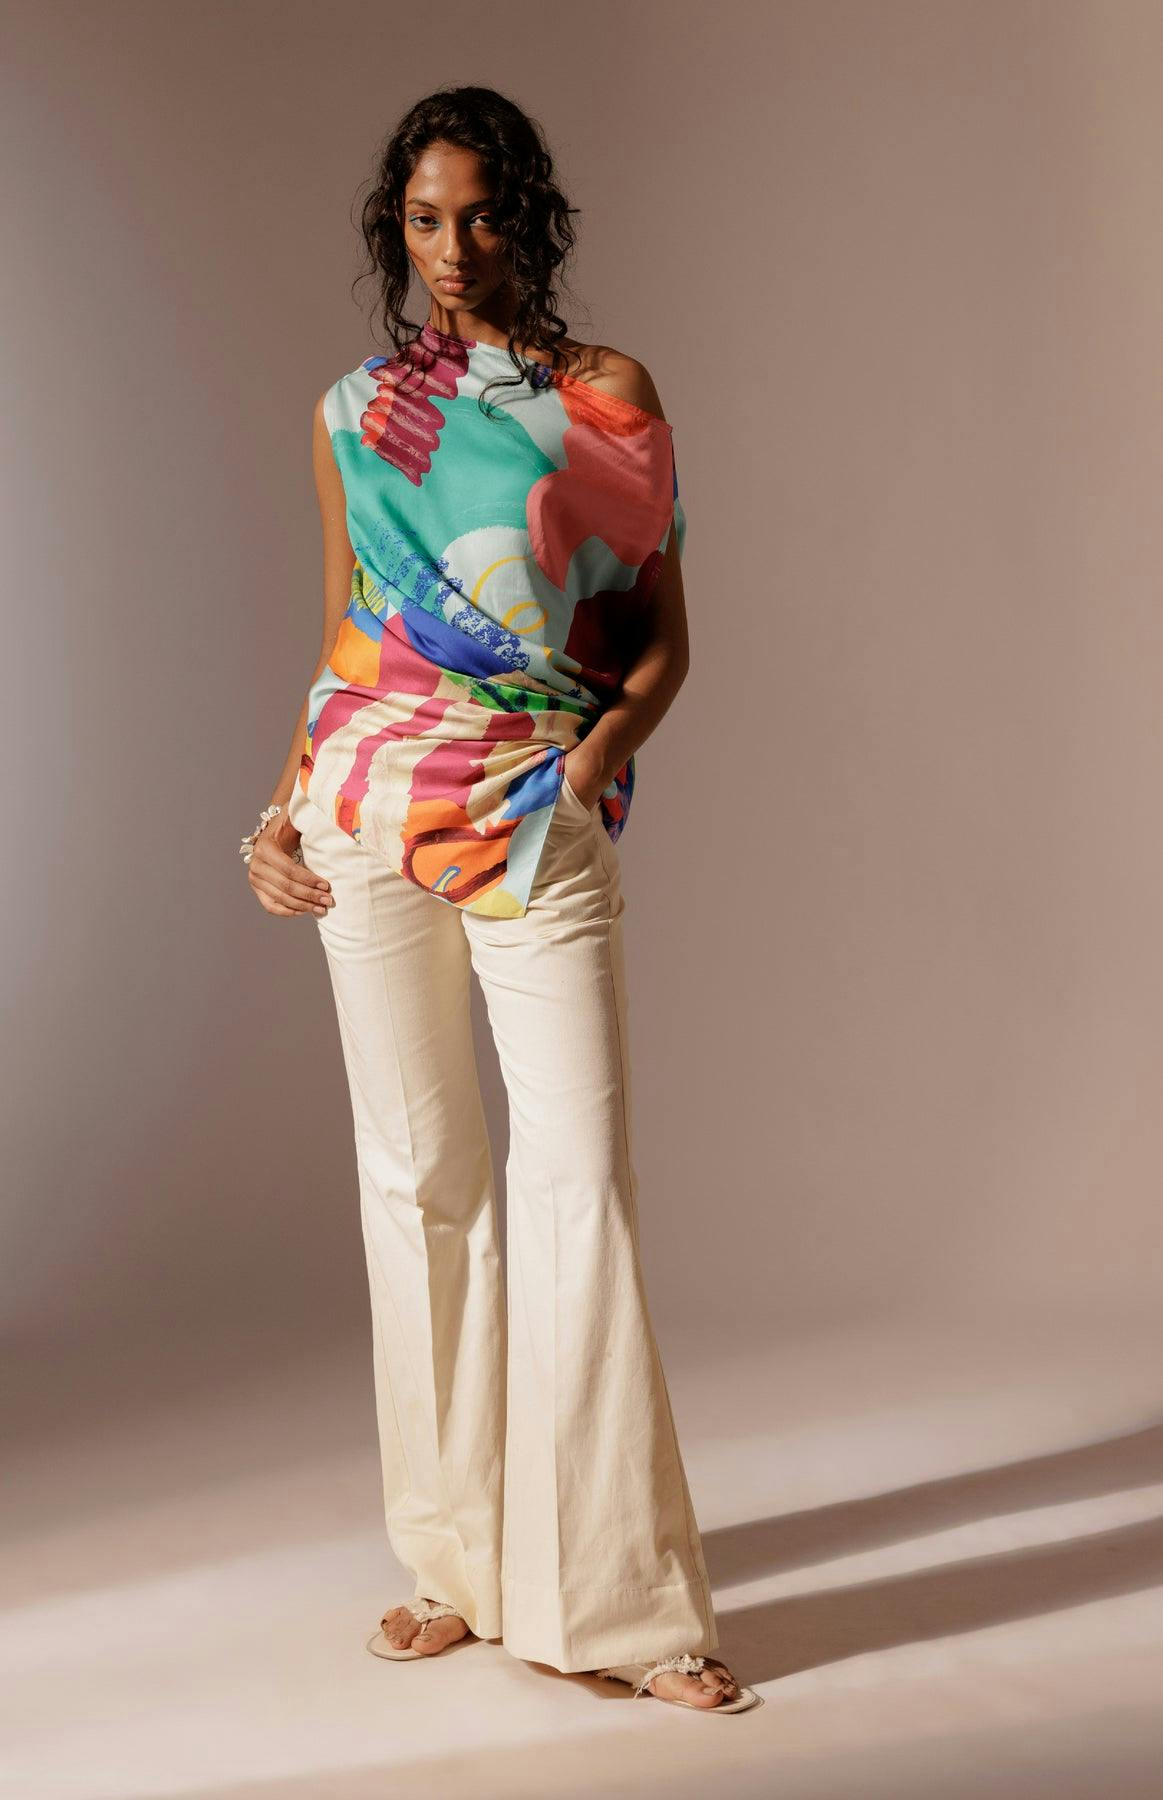 Island Asymmetrical Top, a product by Advait India